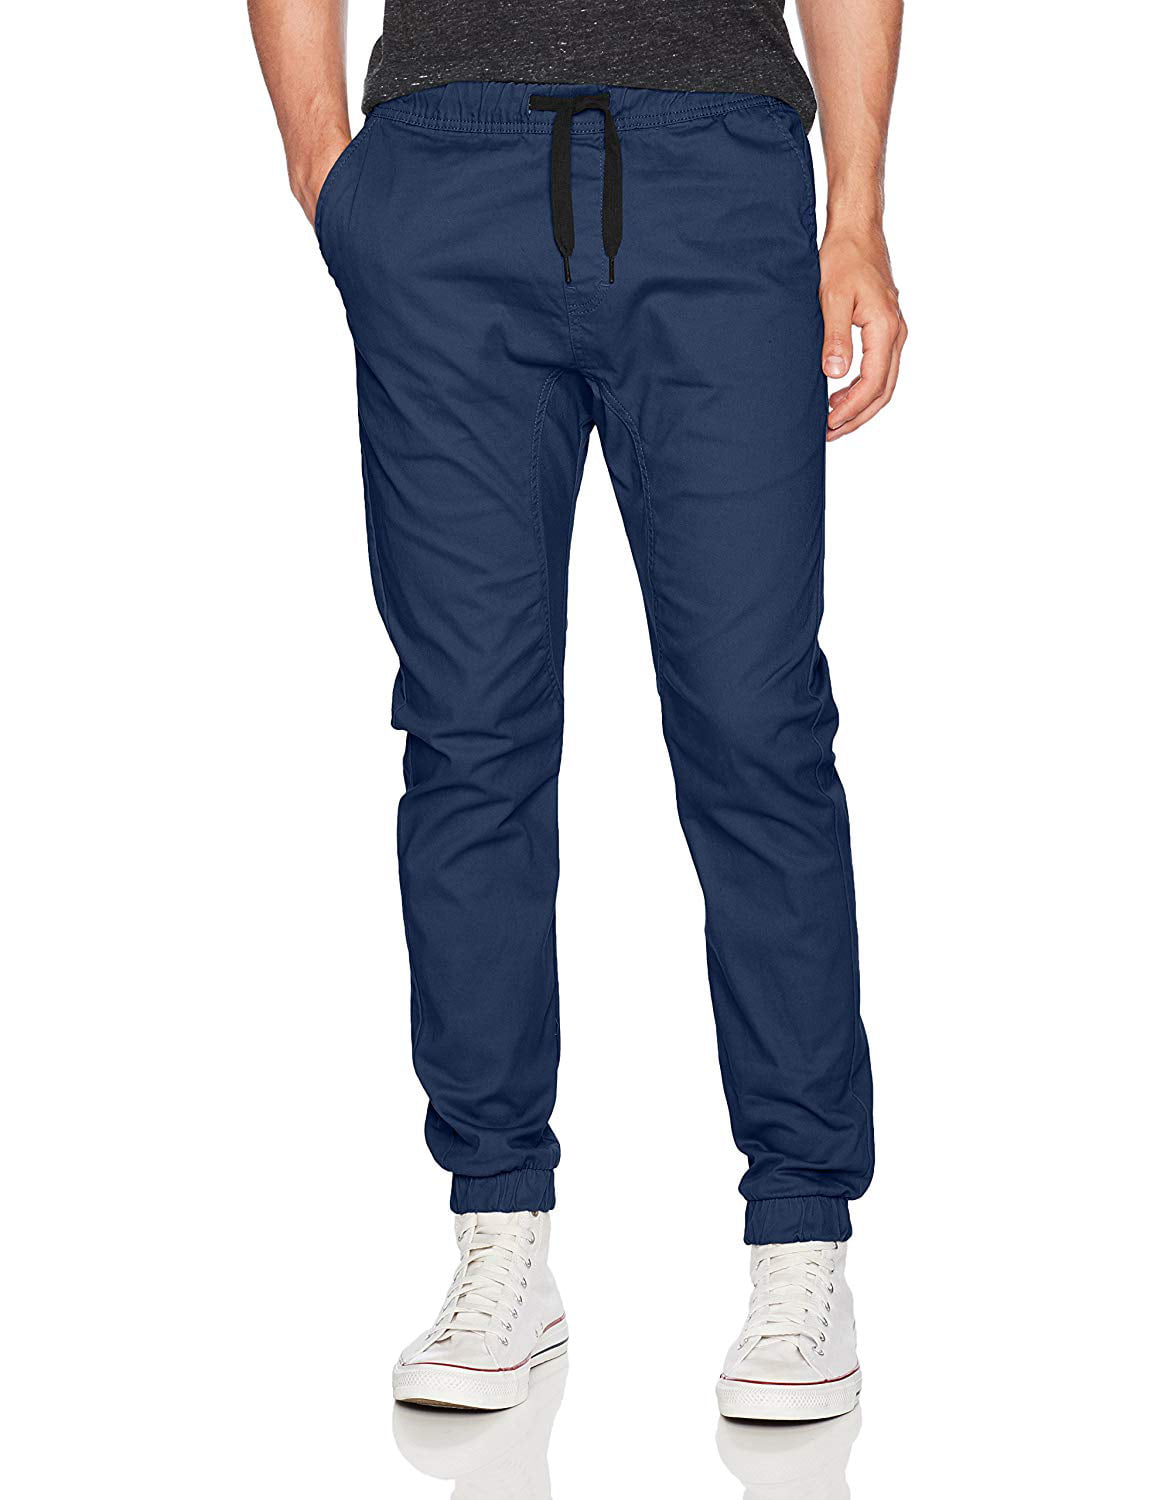 WTO2 Mens Stretch and Twill Fabric Jogger Pant, Adult - Walmart.com